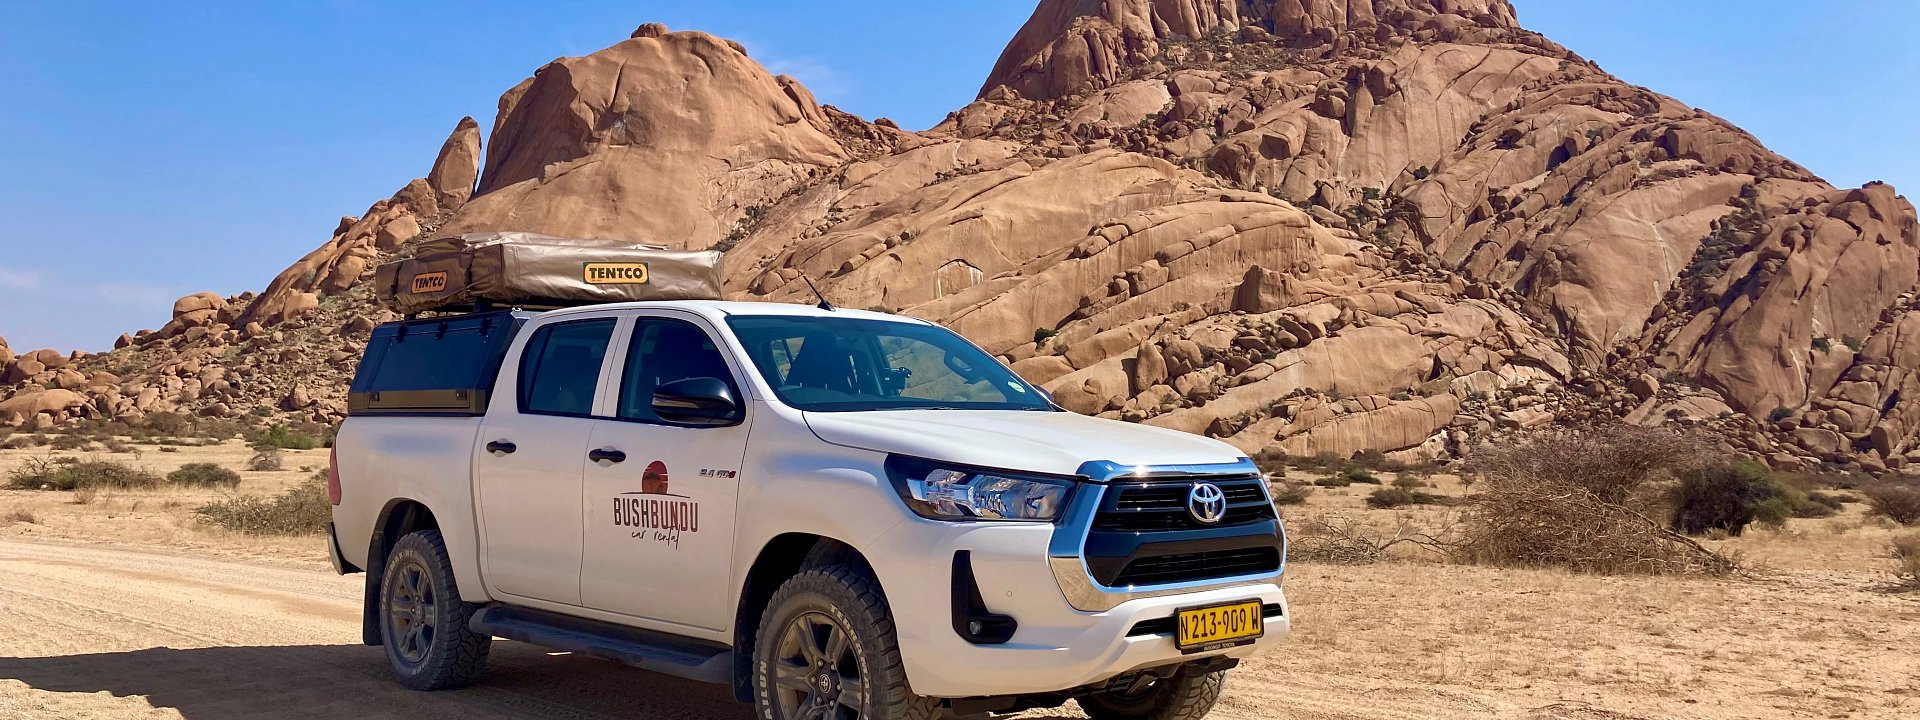 bushbundu-car-rental-windhoek-namibia-home-page-image-of-fully-equipped-with-camping-equipment-4x4-toyota-hilux-in-the-dessert-front-view